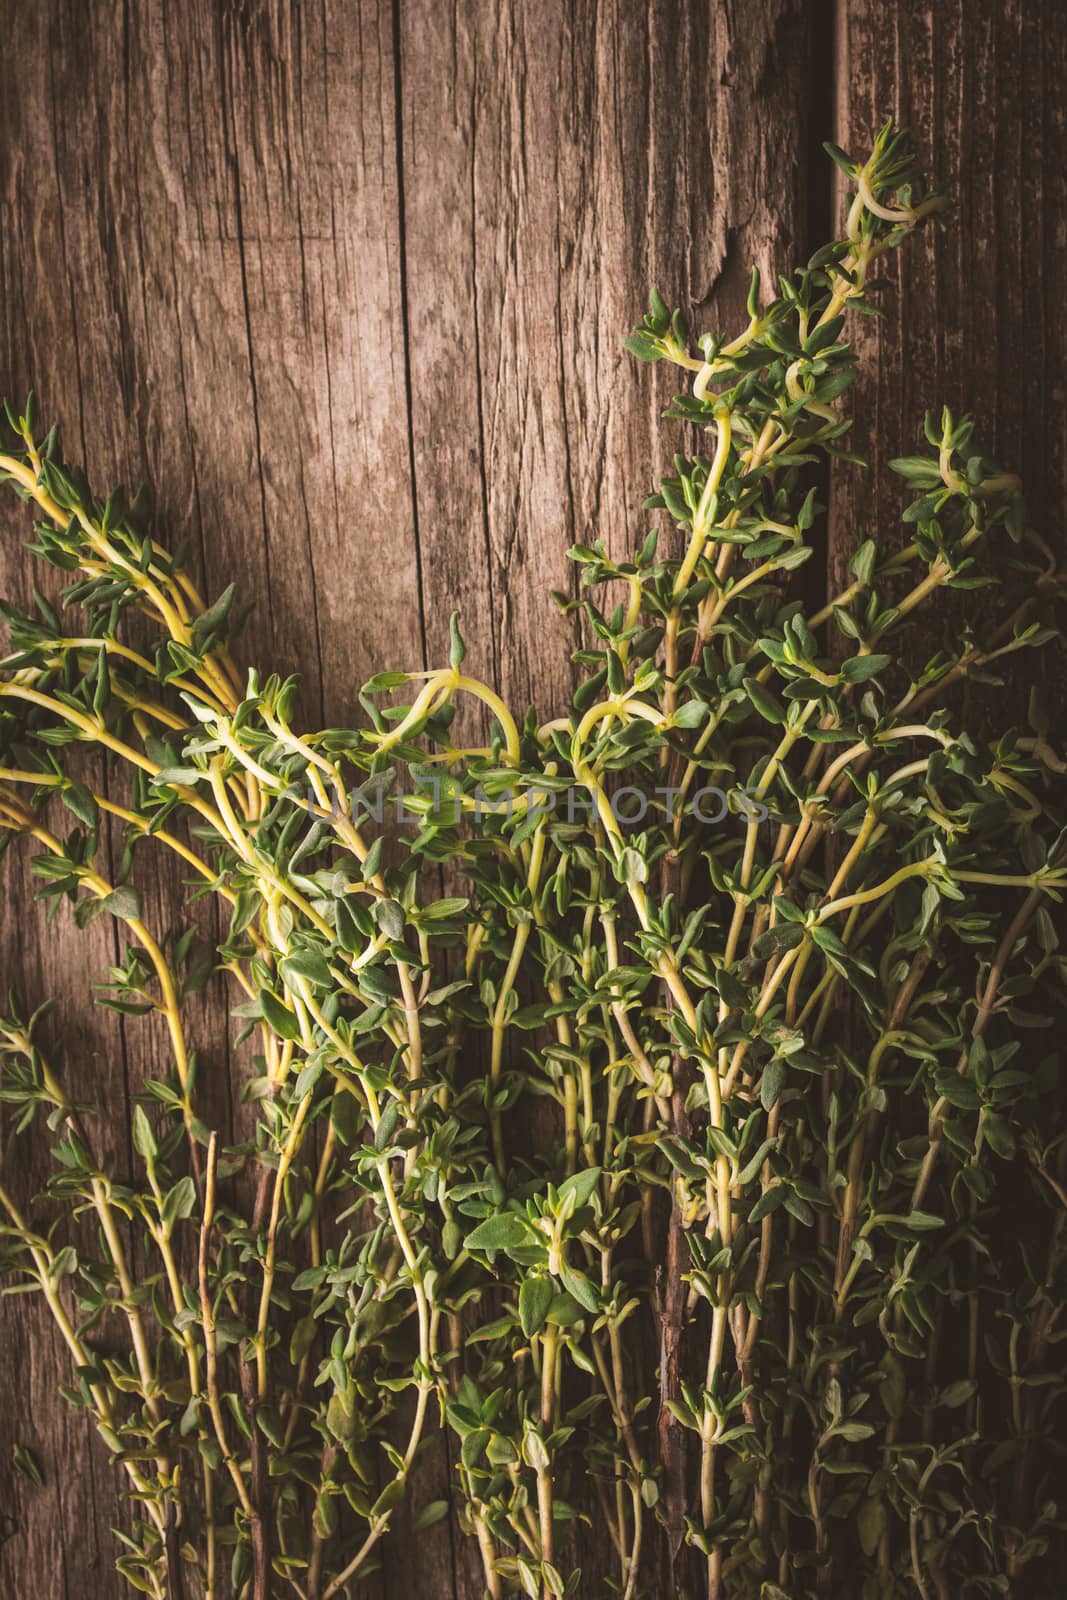 Thyme on the old wooden board vertical